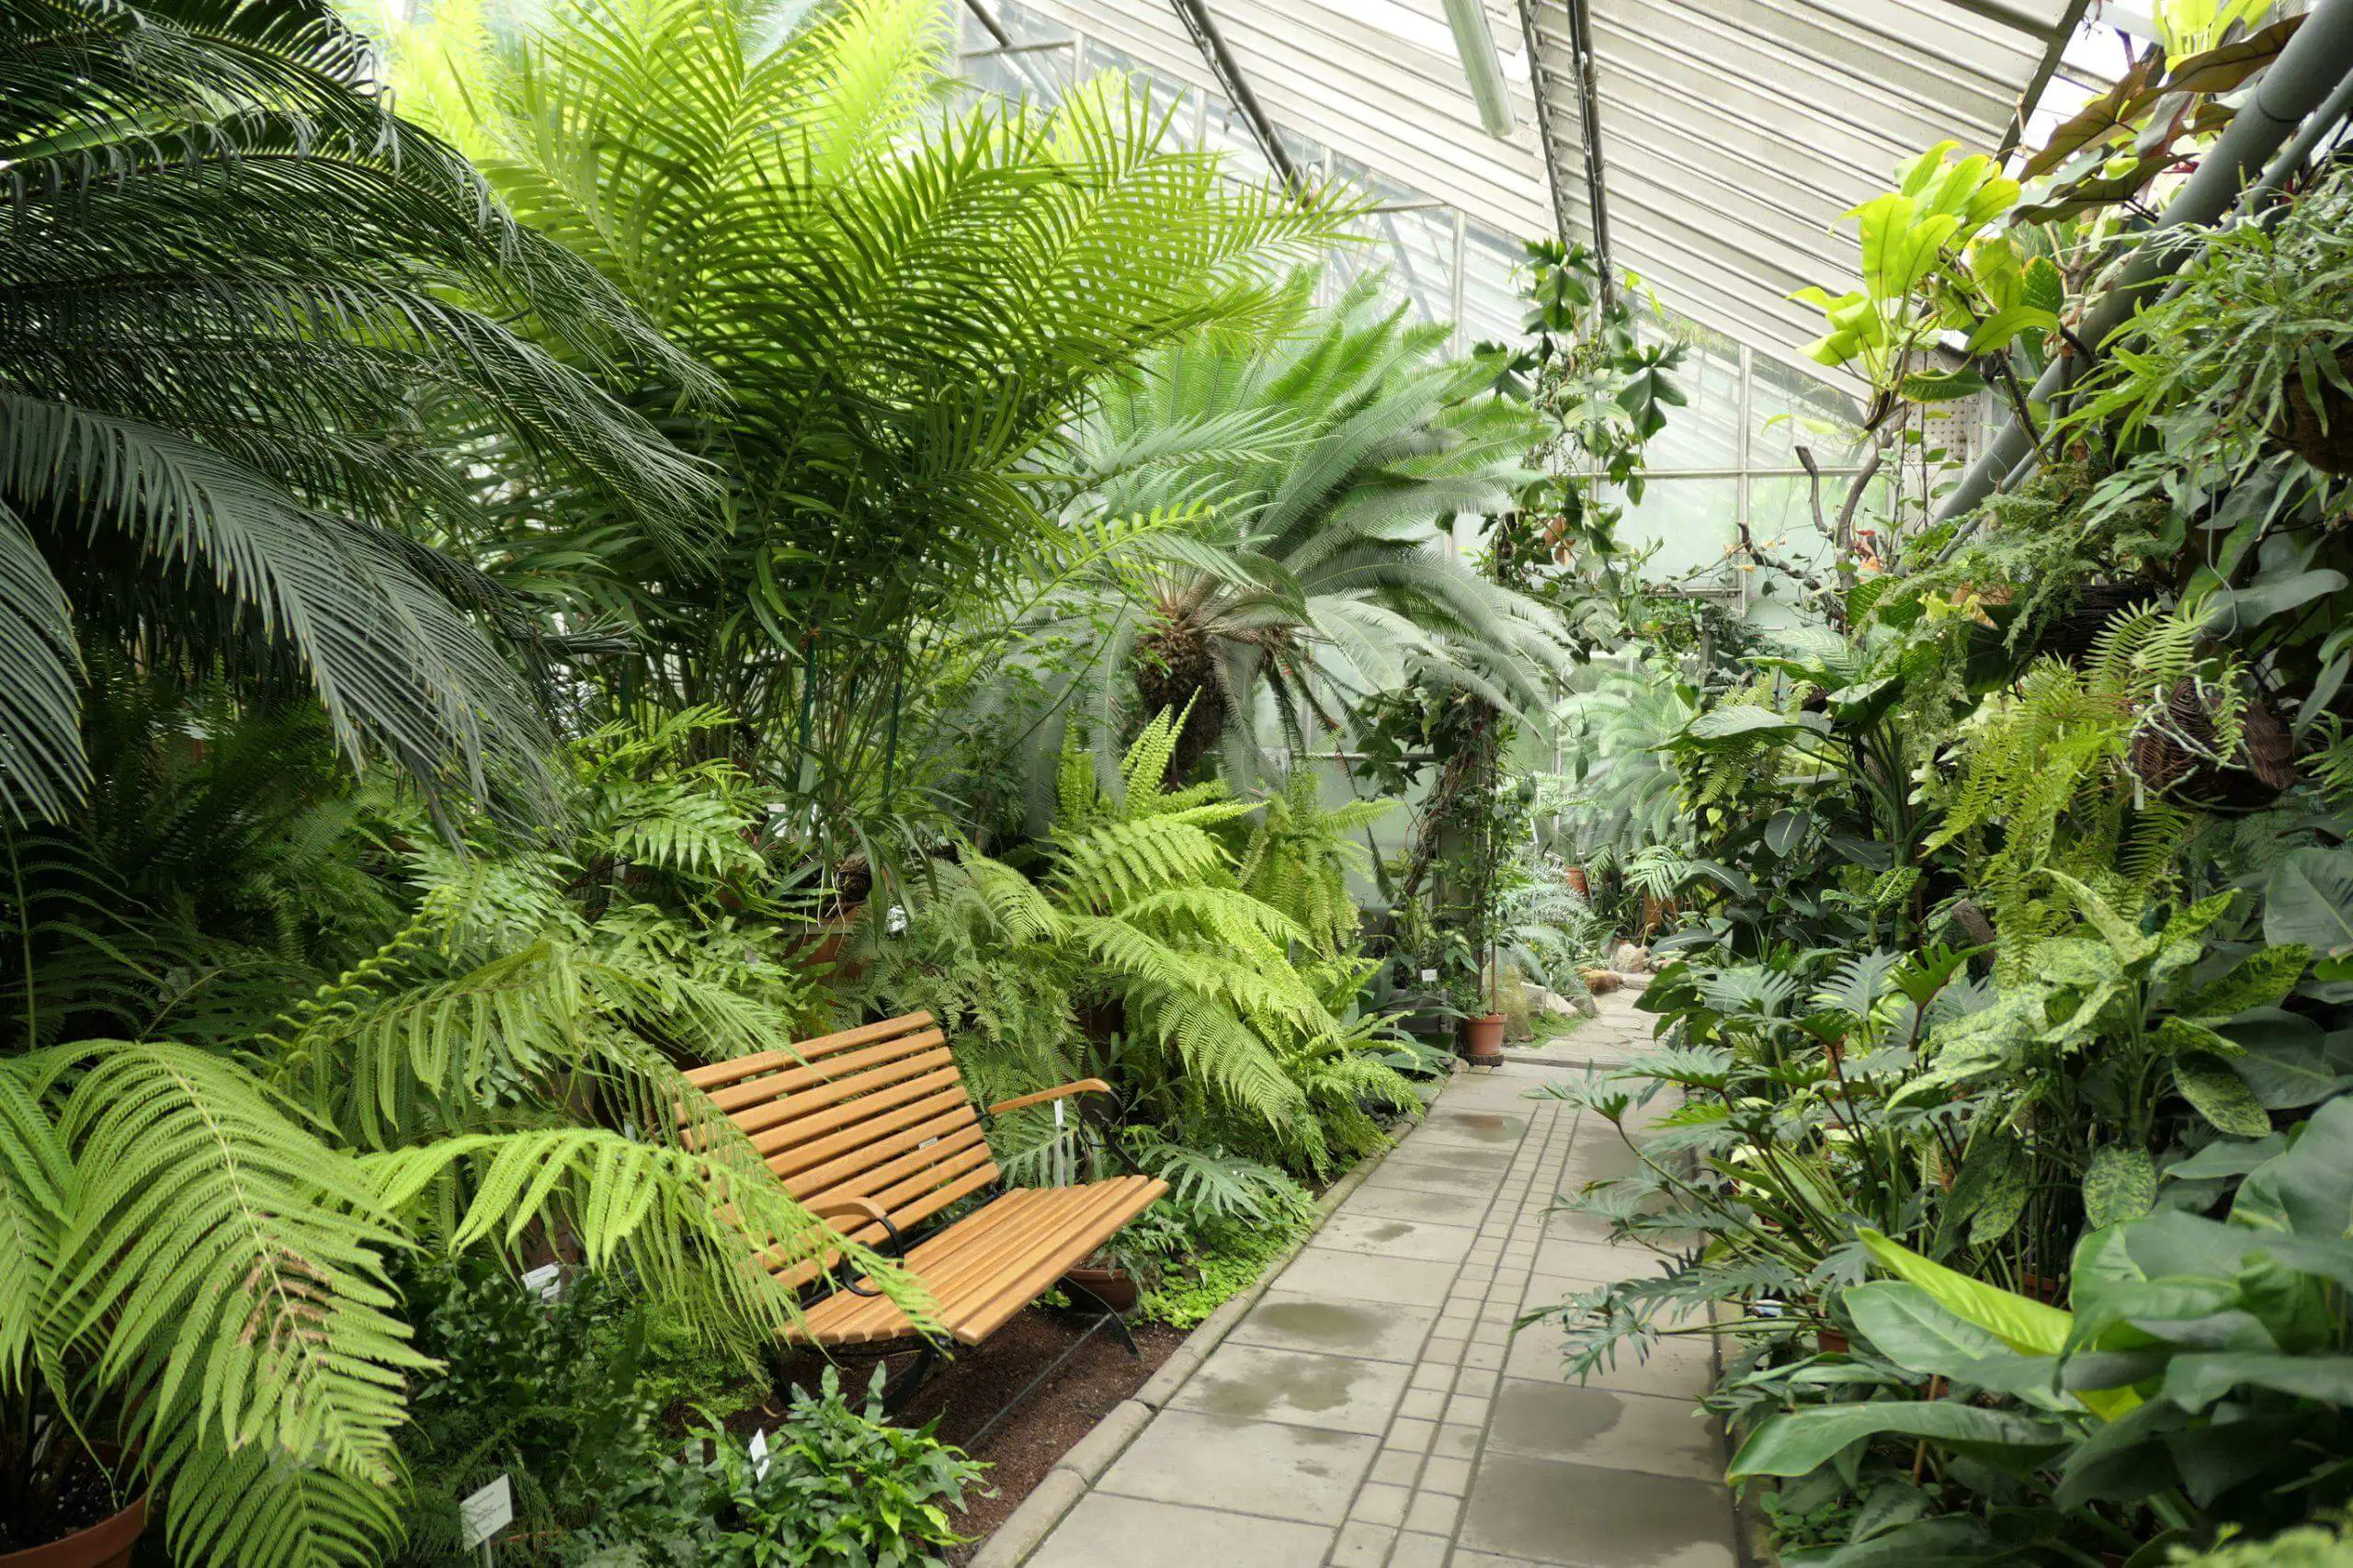 Ferns cycads and different tropical plants in the greenhouse of botanical garden